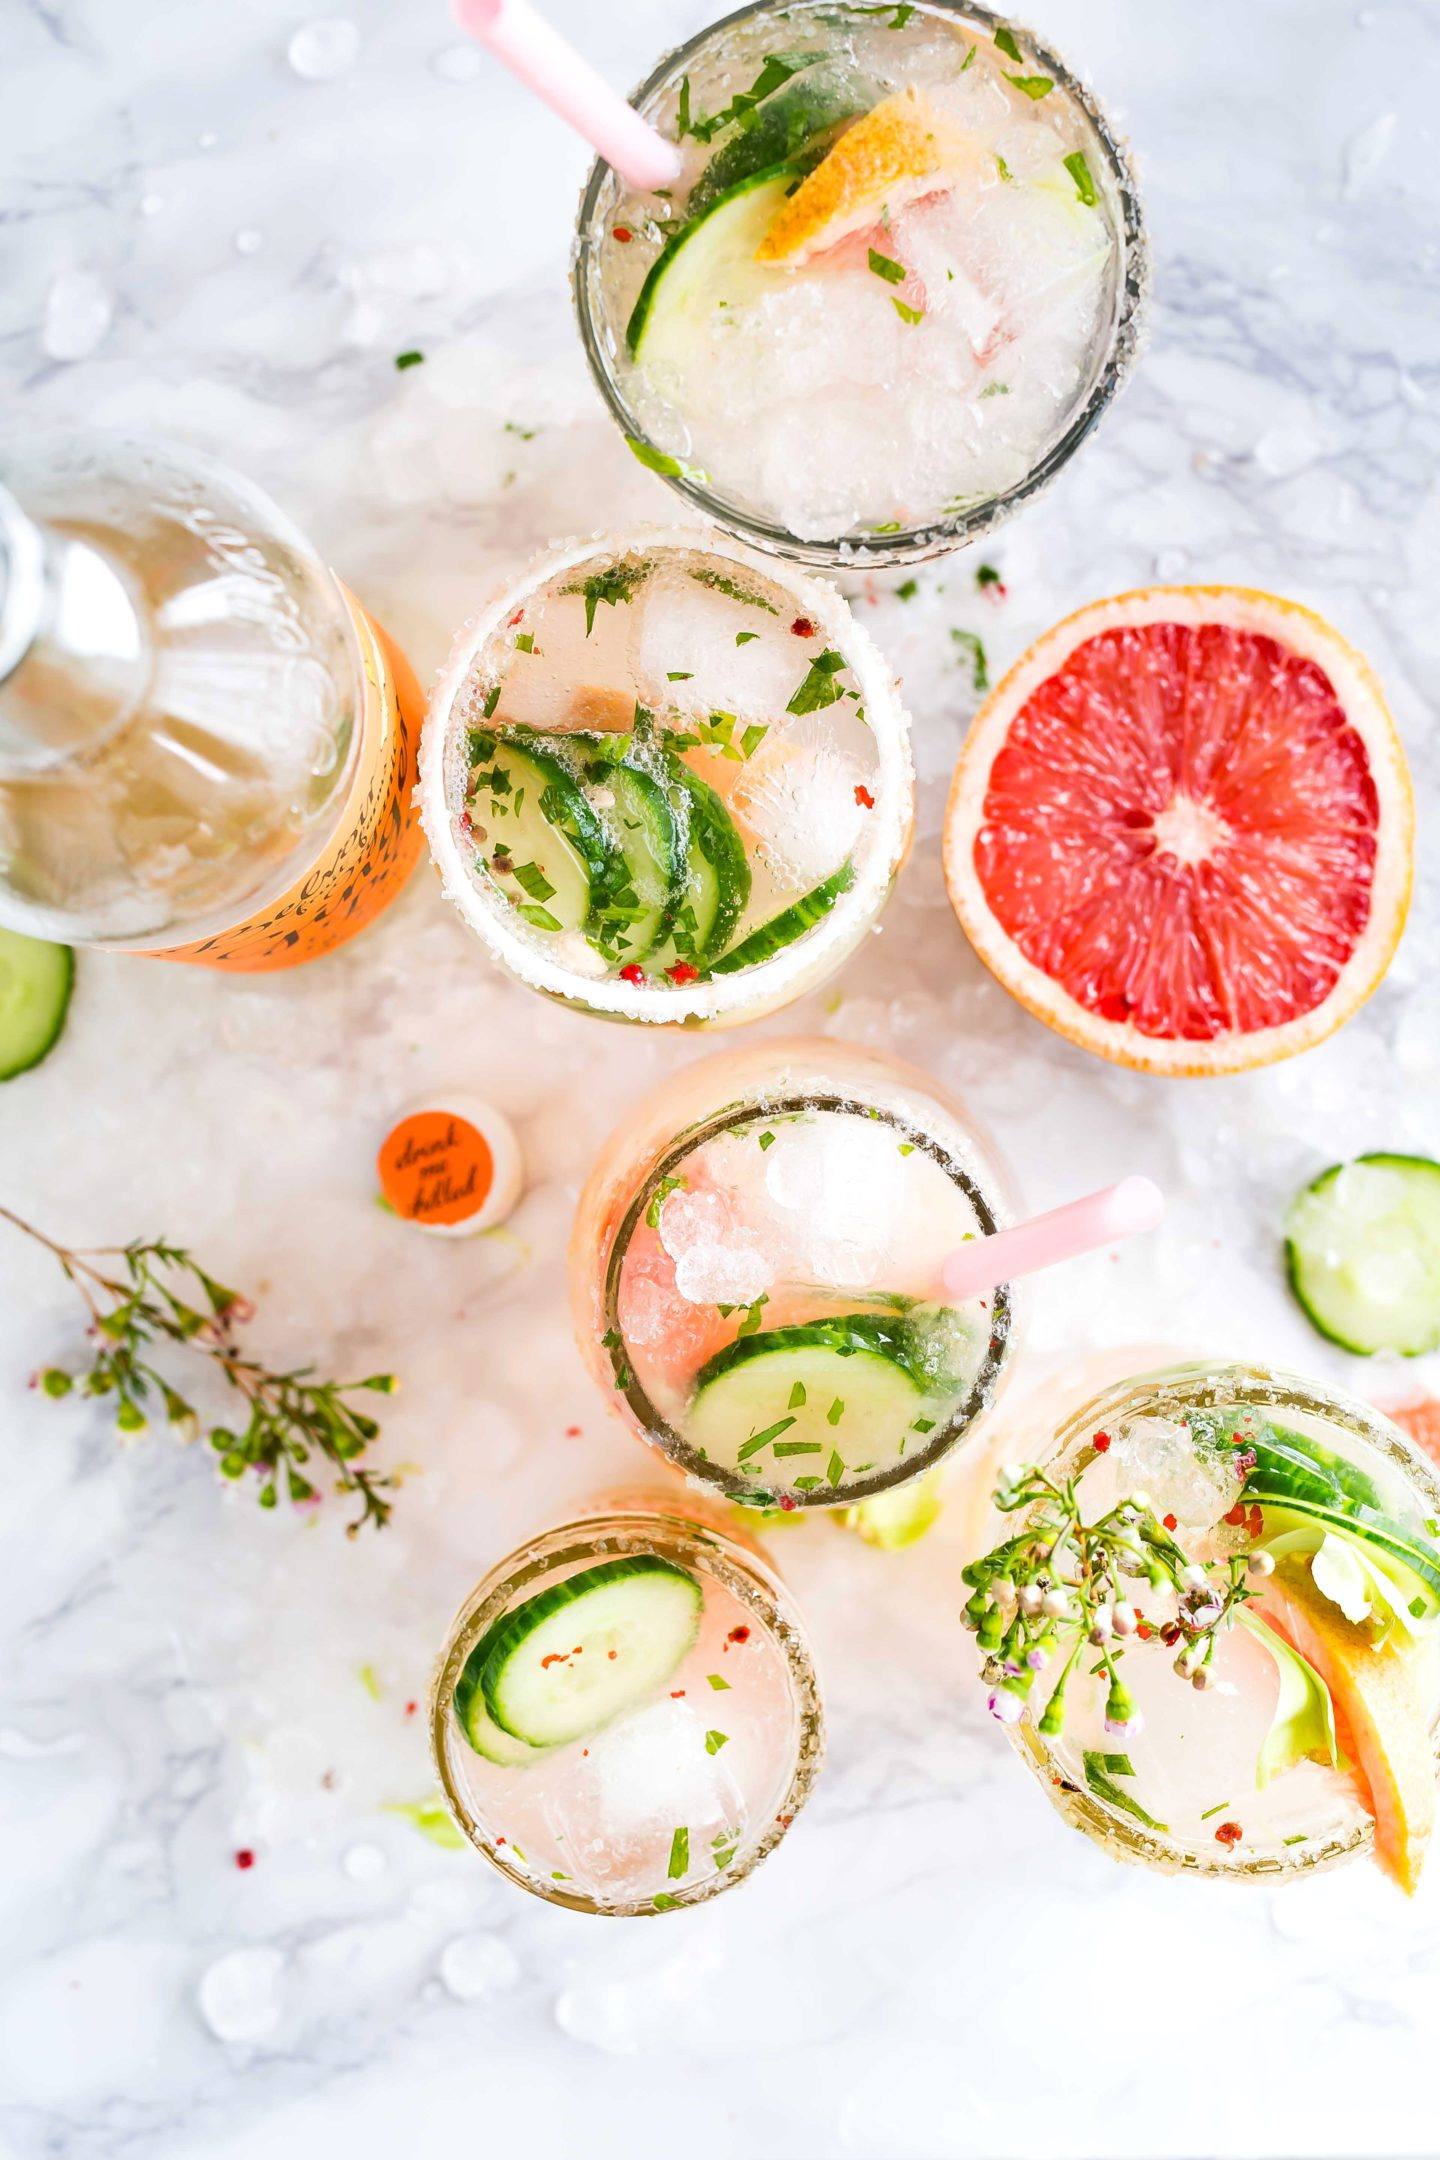 mocktail recipes to make this summer, by lifestyle blogger What The Fab